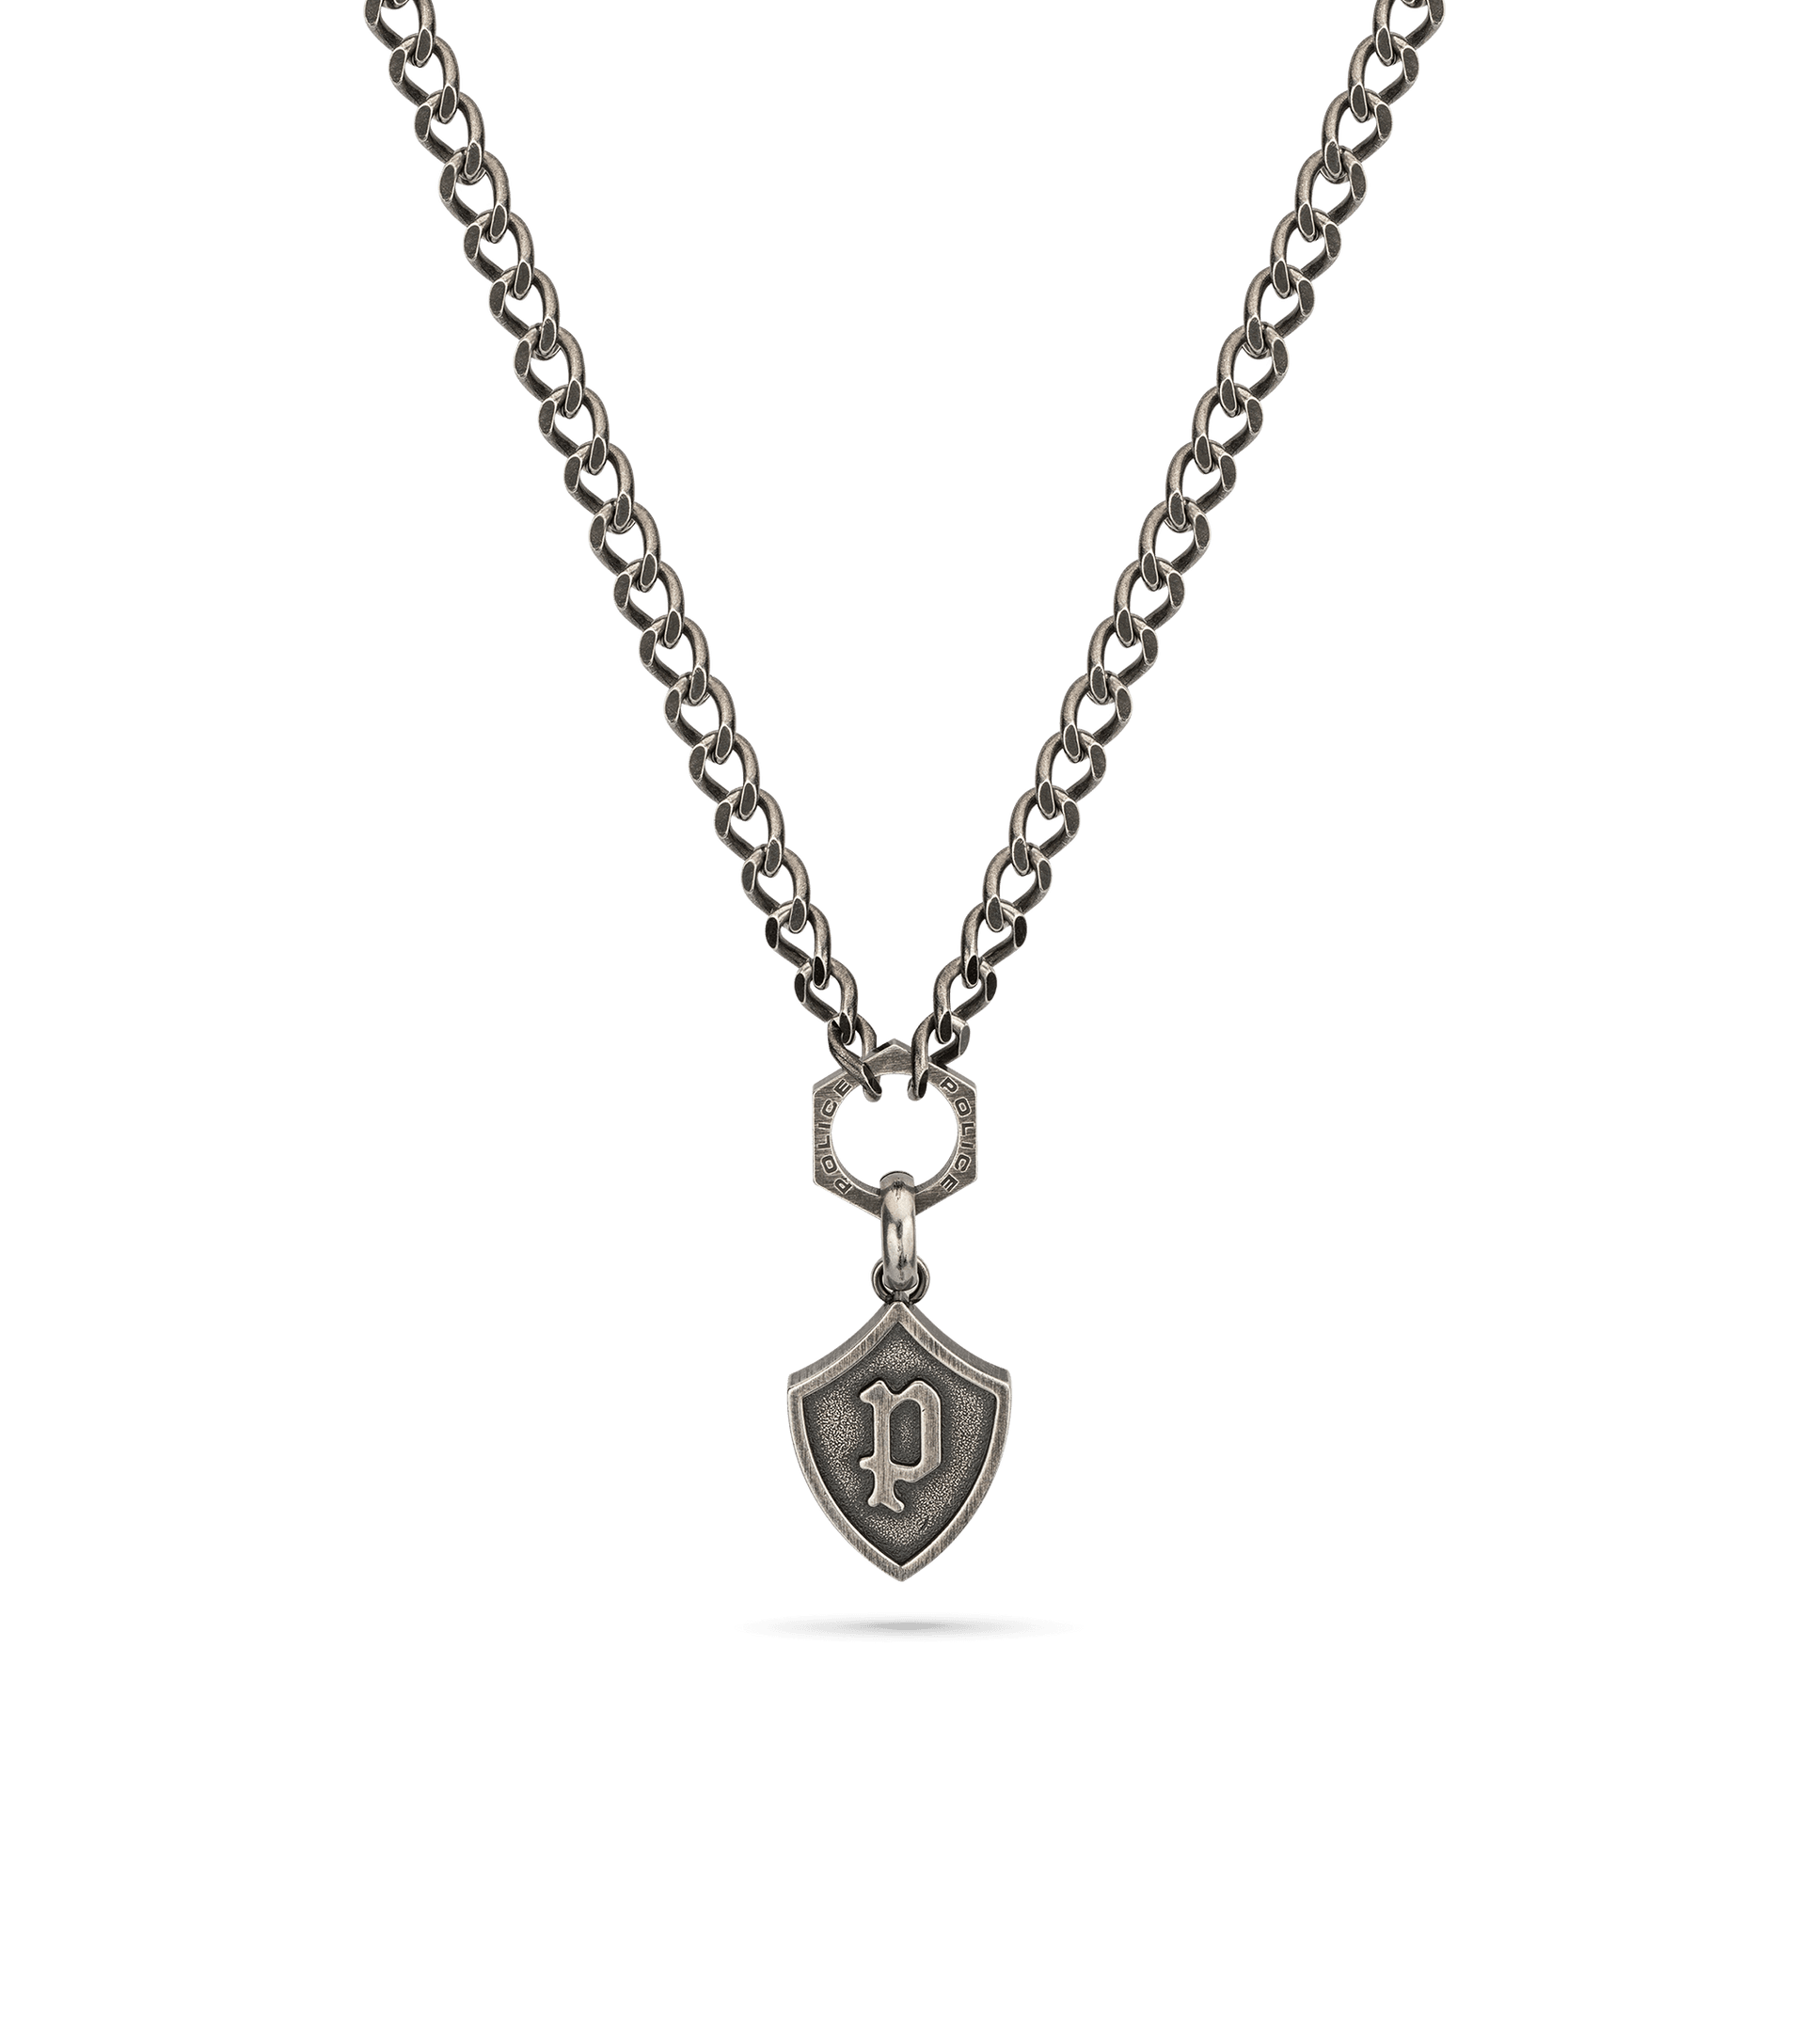 Police jewels - Tribal For PEAGN2120211 Men Edge By Necklace Police